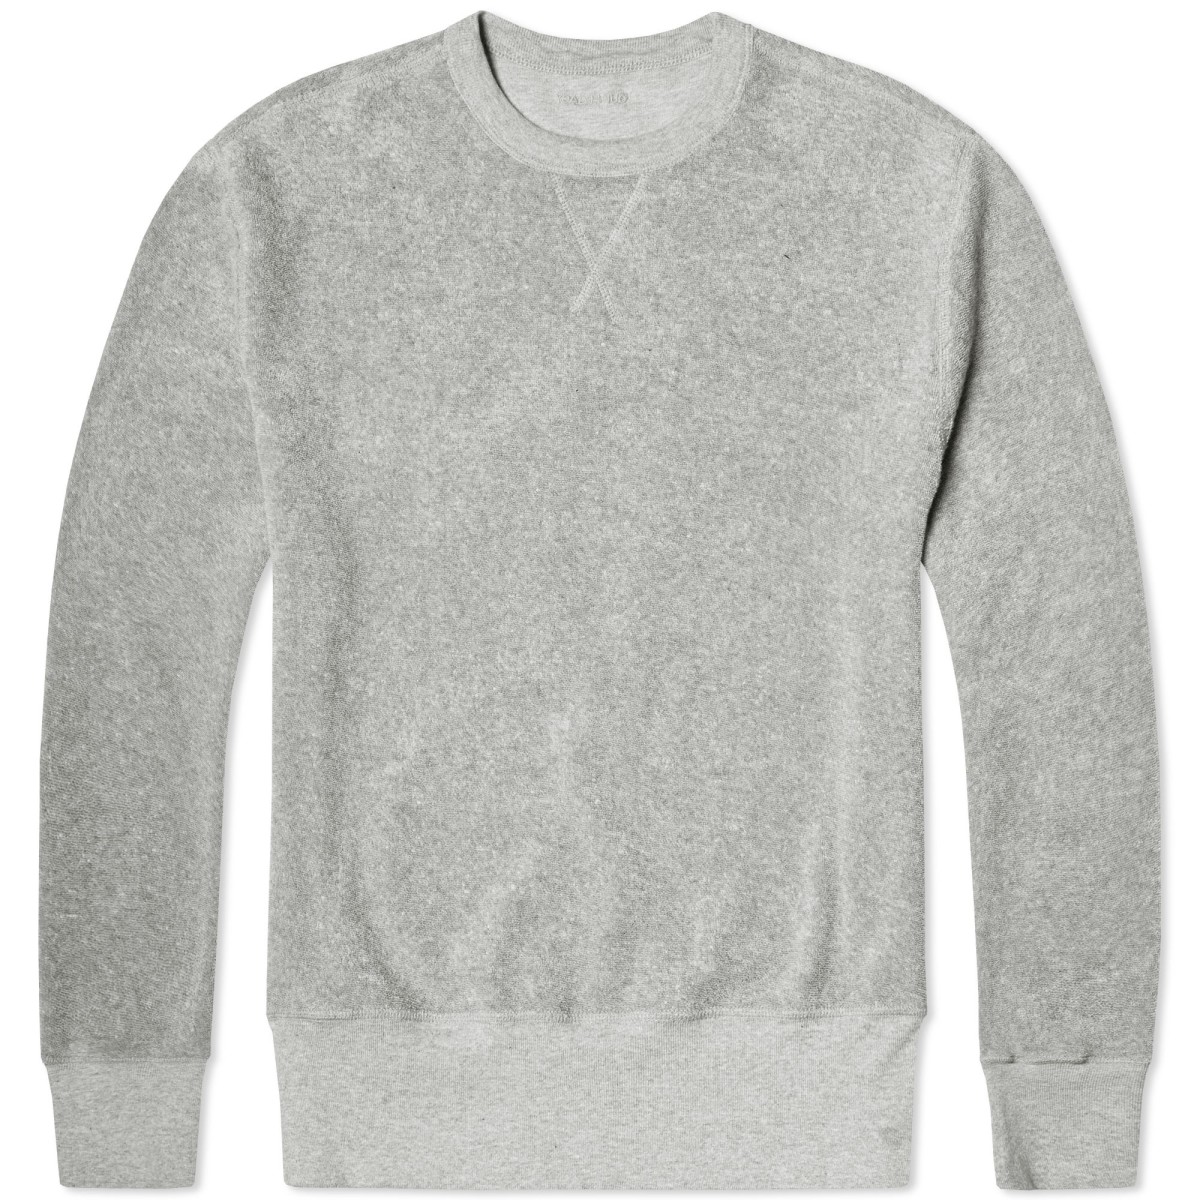 Two Sweatshirts For The Price Of One Fairly Expensive Eweatshirt | Complex